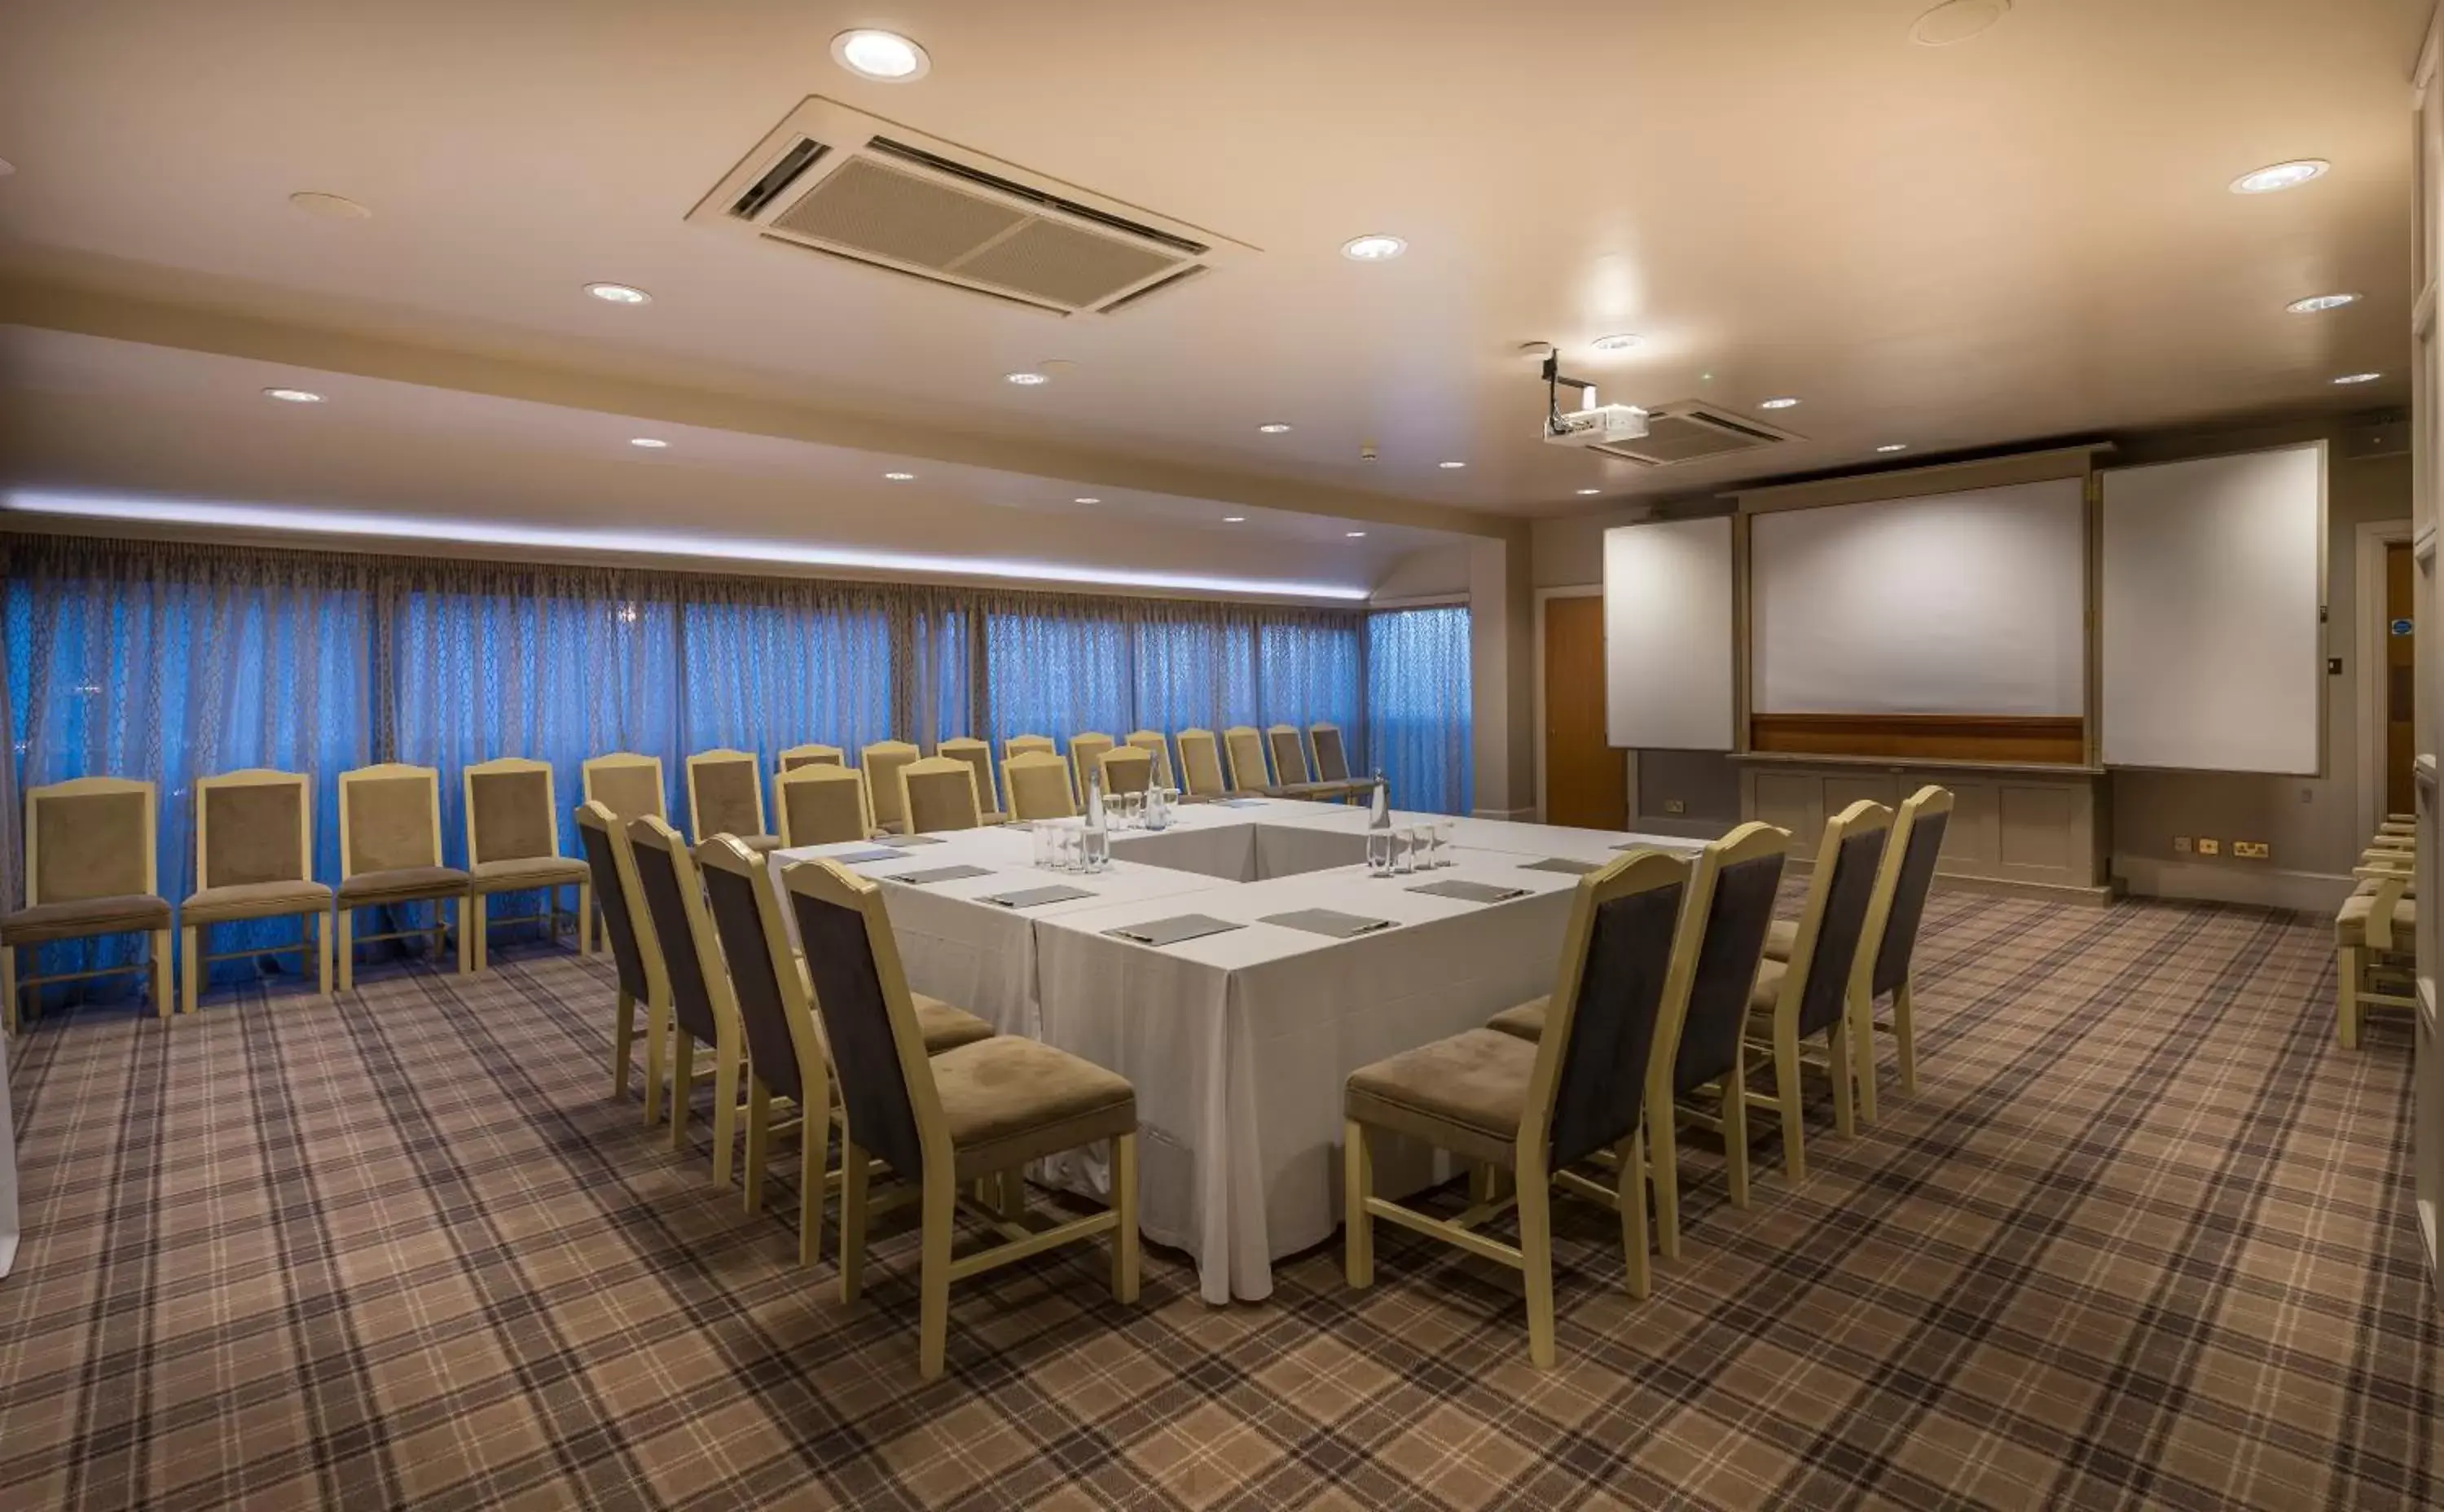 Meeting/conference room in The Feathers Hotel, Ledbury, Herefordshire